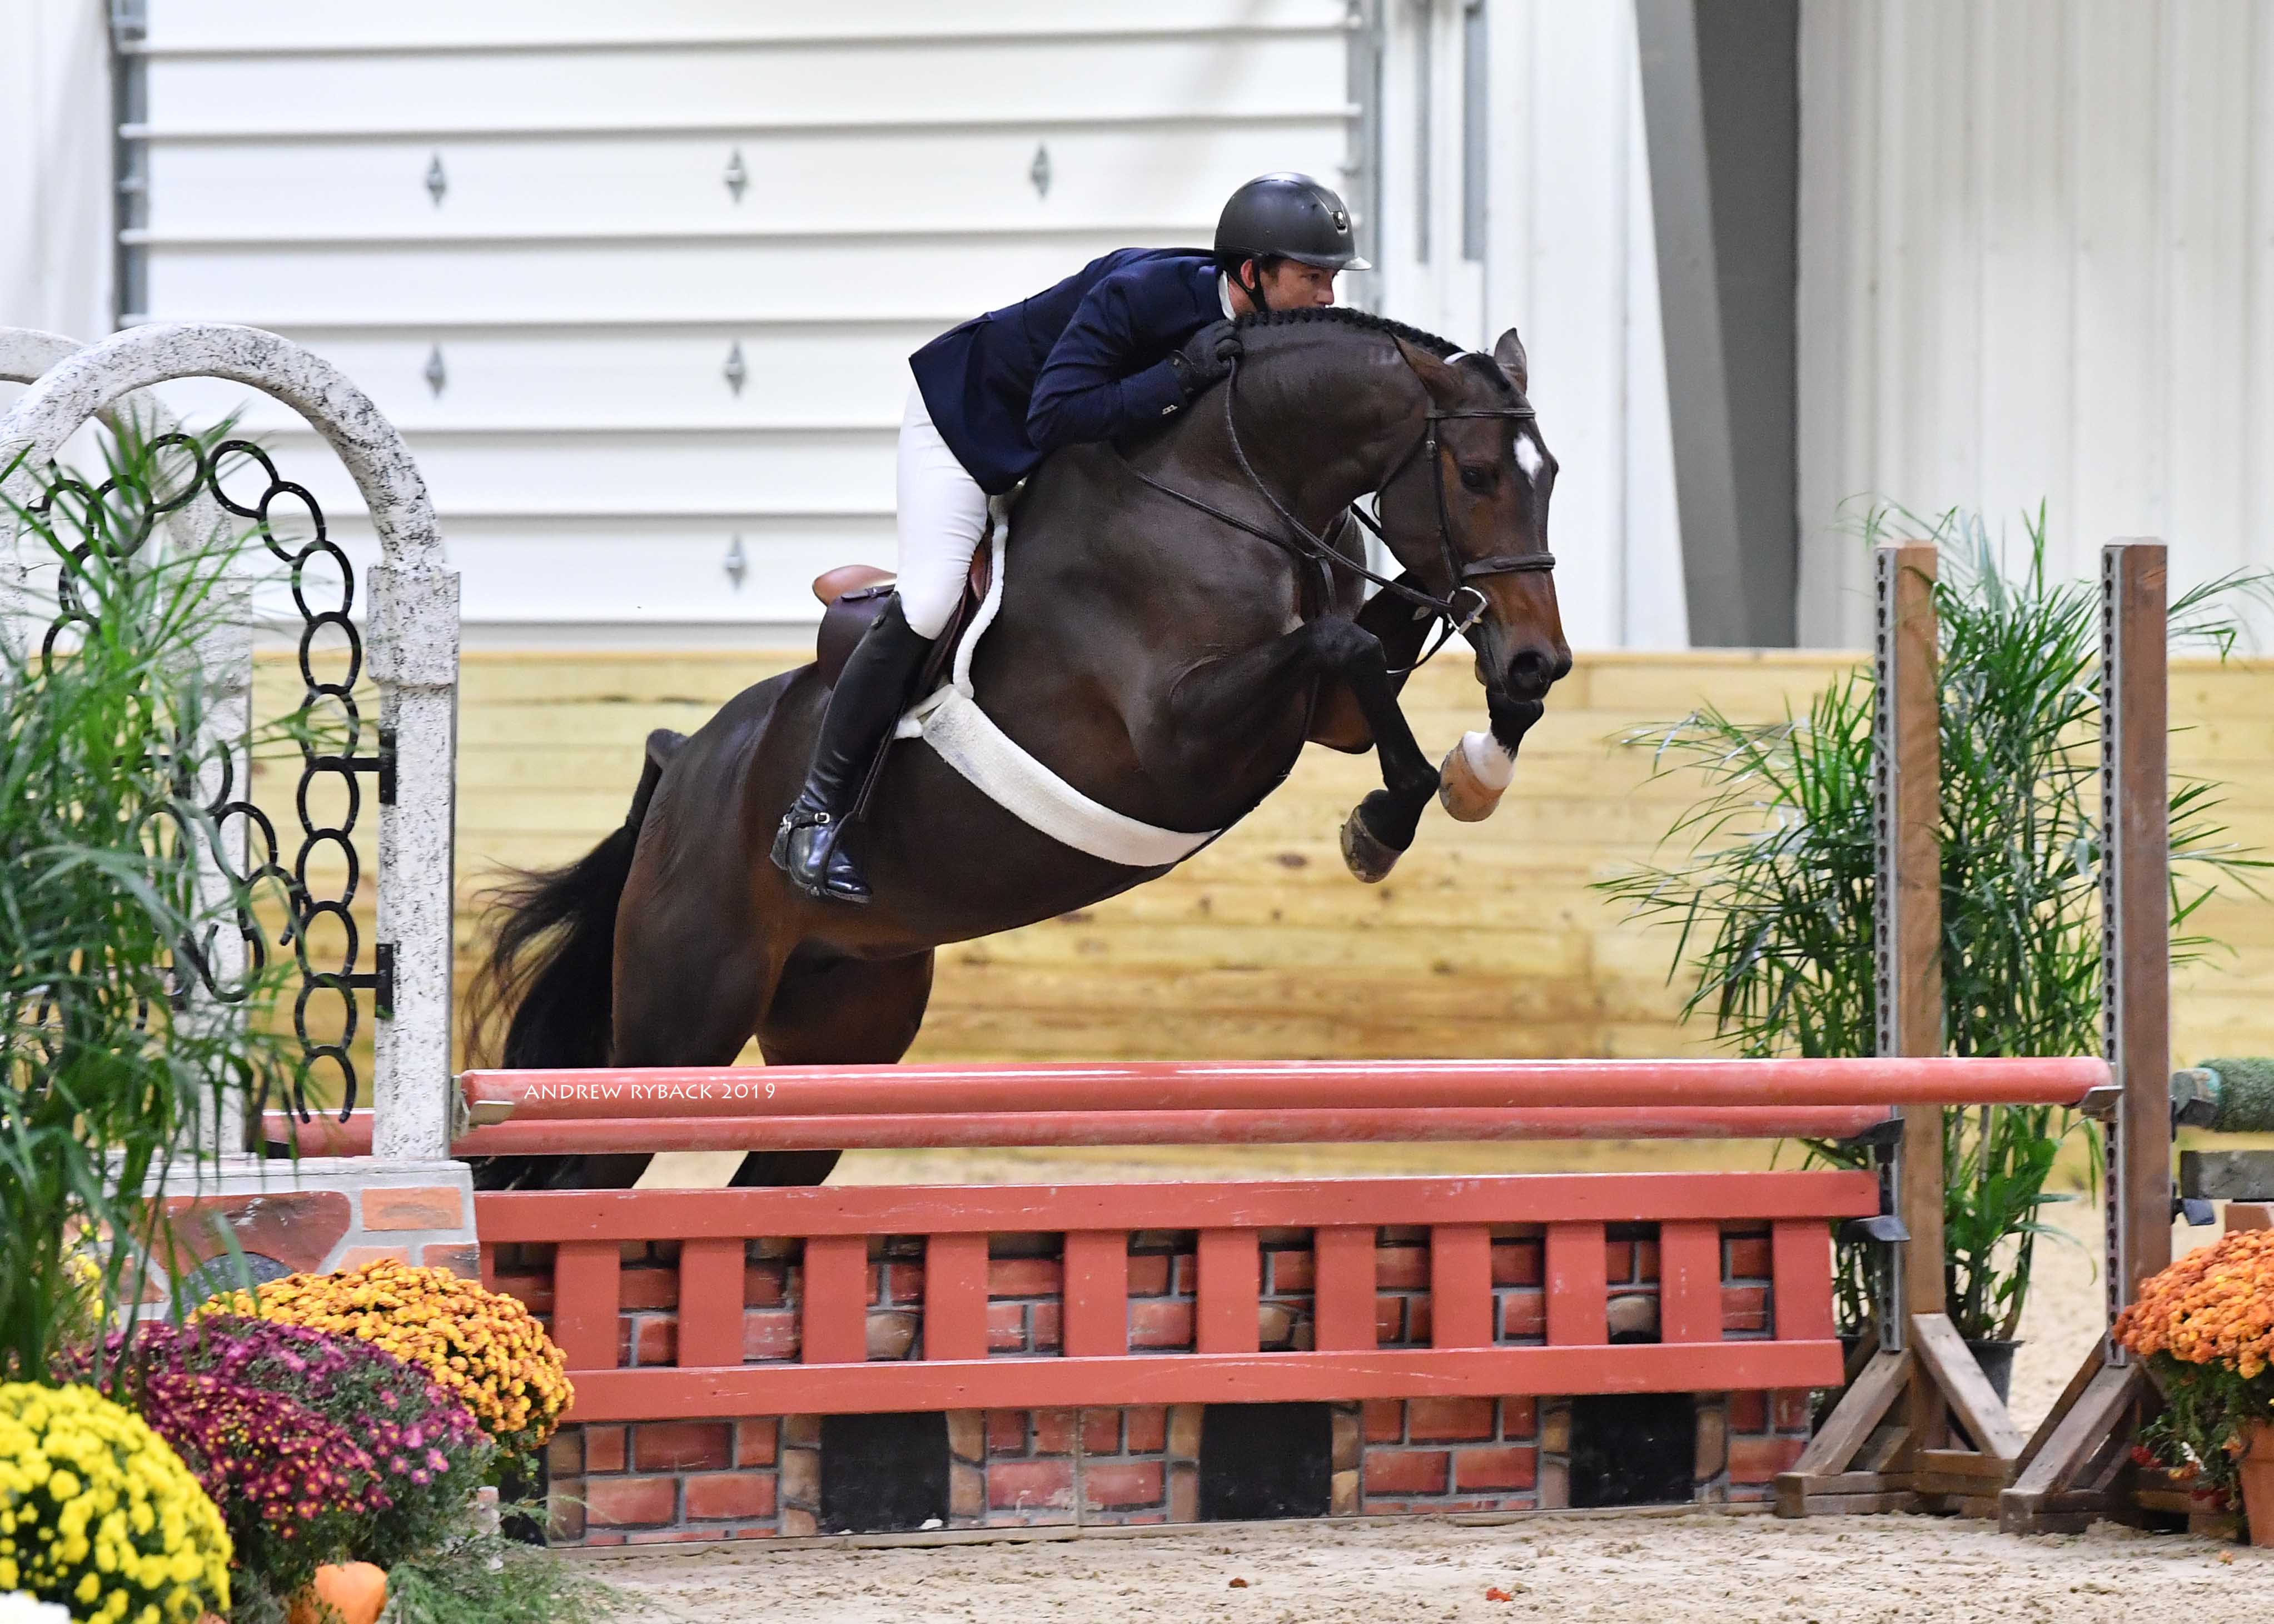 USHJA World Take Corallo - International in Z $40,000 Honors Crolick Derby Hunter the Greg Equestrian Center Top and